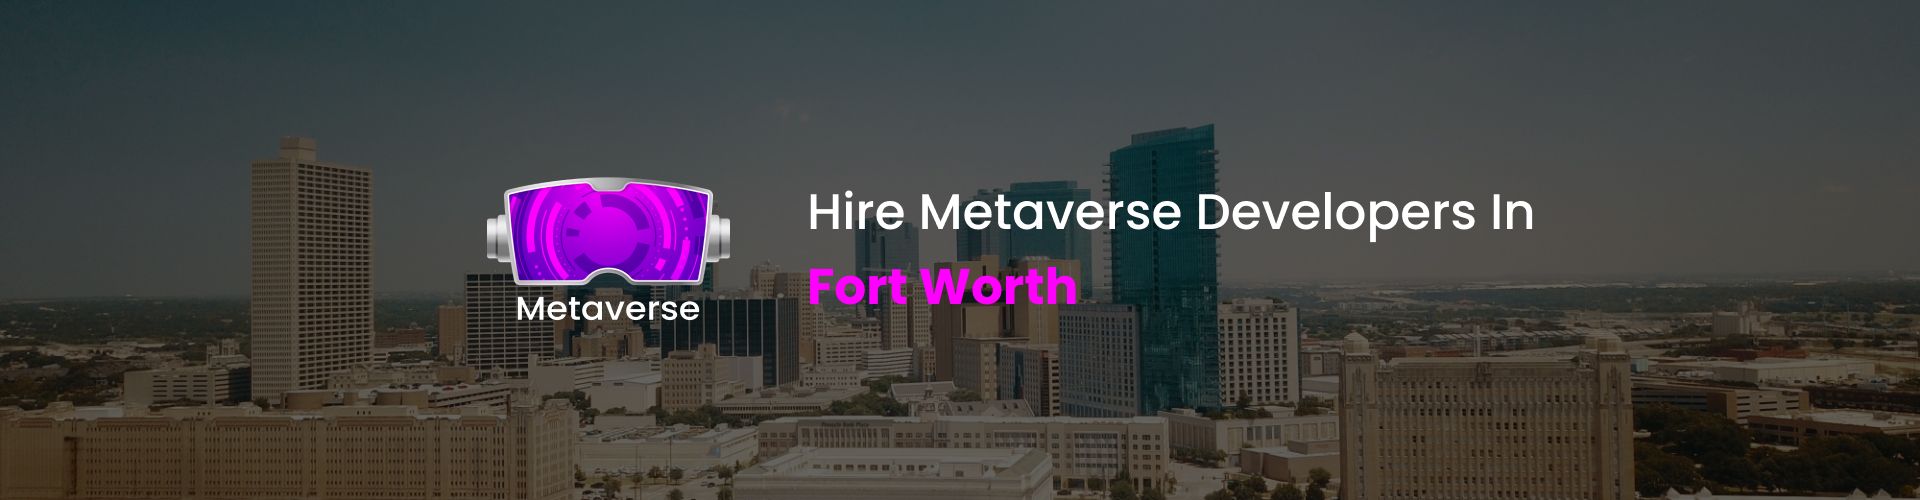 metaverse developers in fort worth